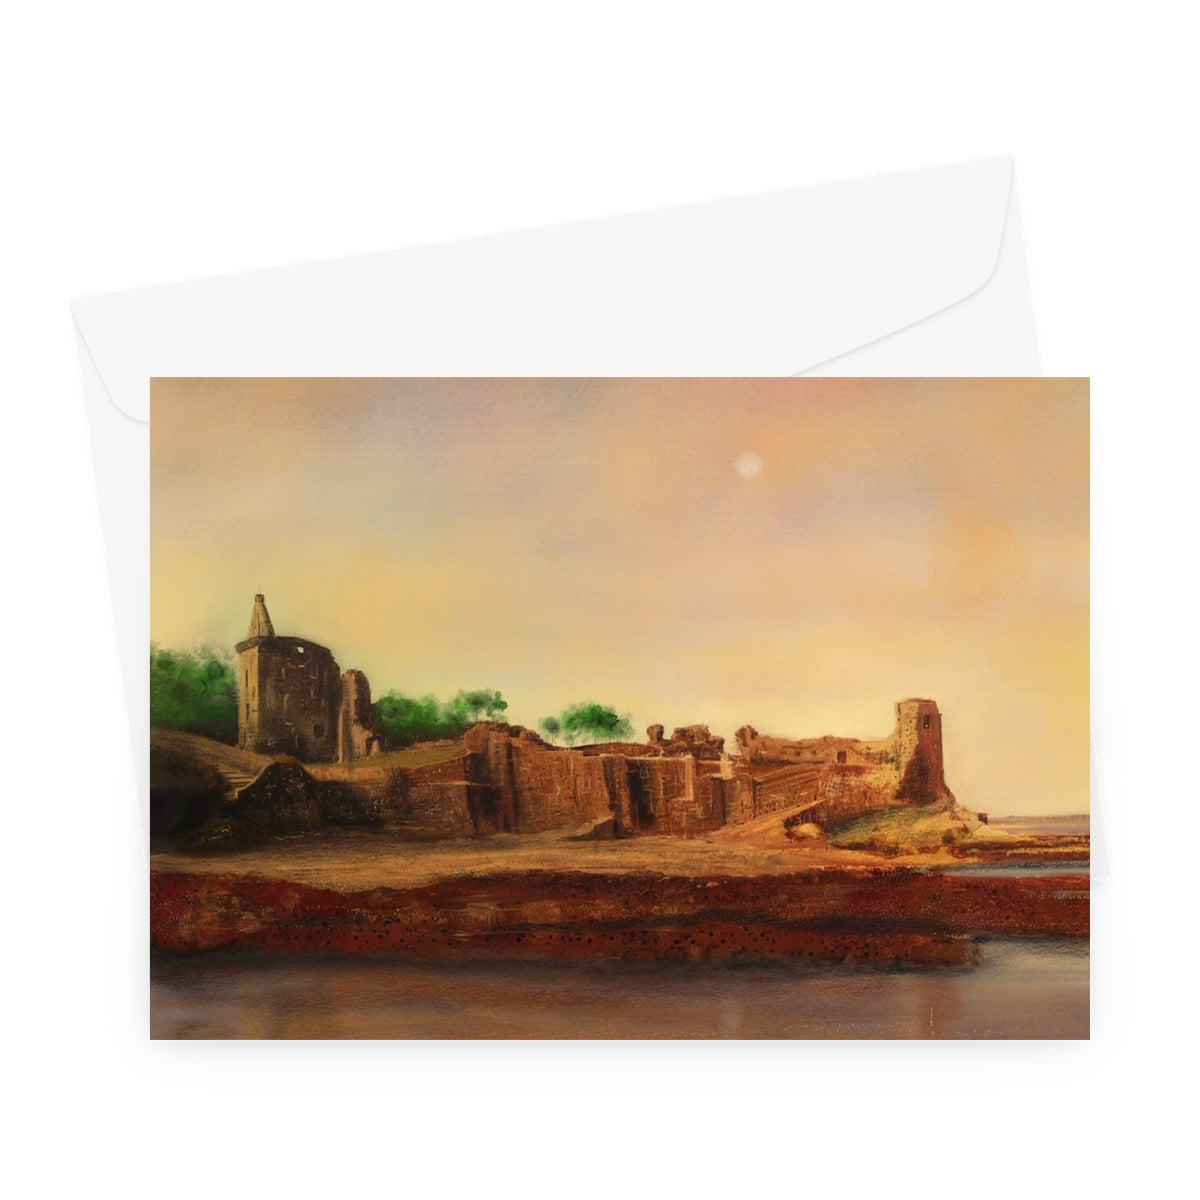 St Andrews Castle Art Gifts Greeting Card-Greetings Cards-Historic & Iconic Scotland Art Gallery-A5 Landscape-10 Cards-Paintings, Prints, Homeware, Art Gifts From Scotland By Scottish Artist Kevin Hunter